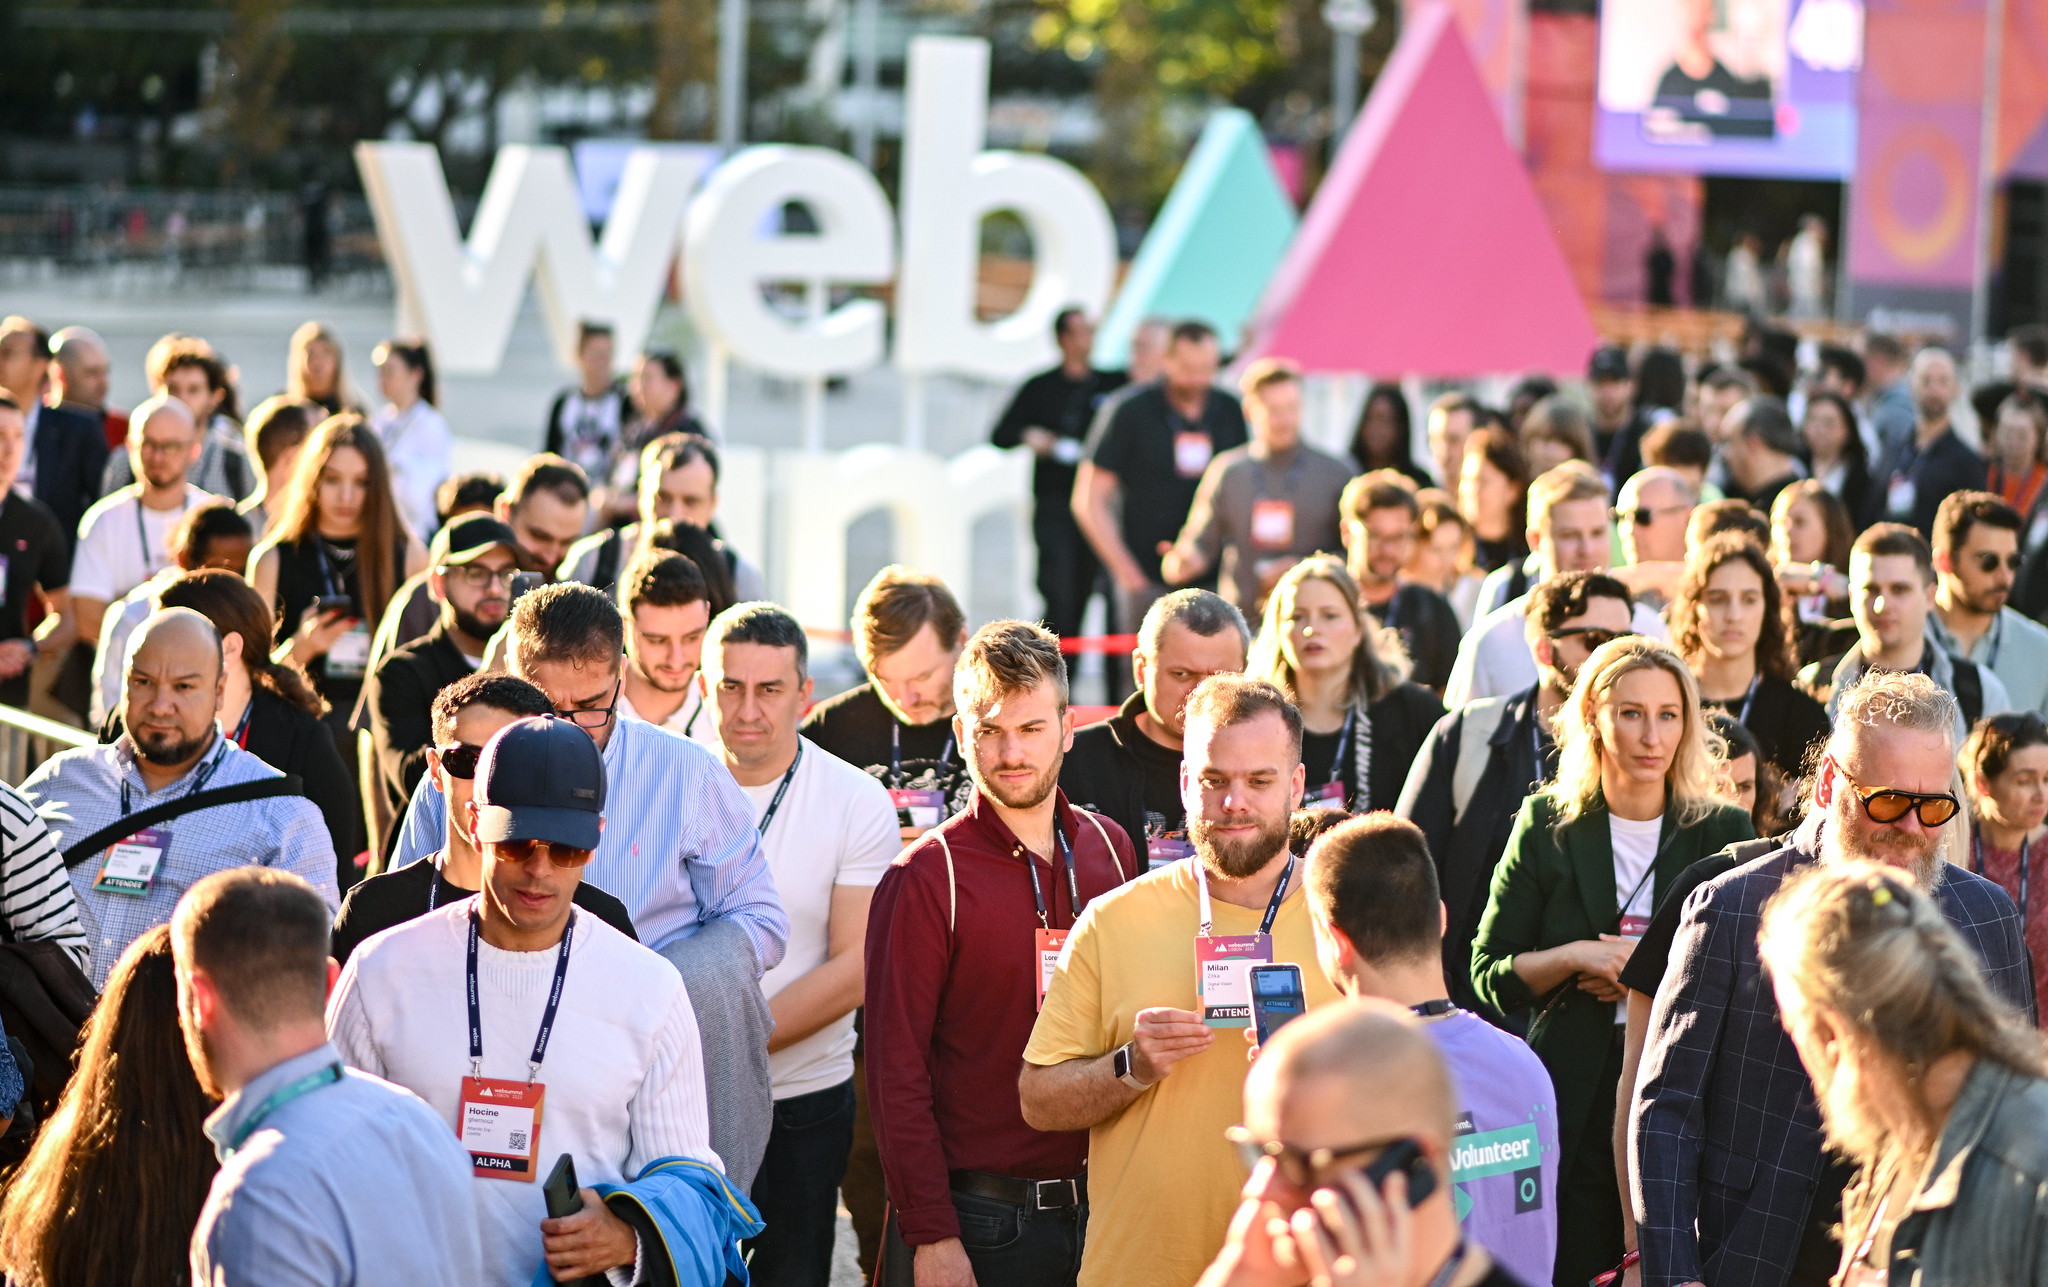 Attendees arrive for the opening night of Web Summit 2023 at the Altice Arena in Lisbon, Portugal